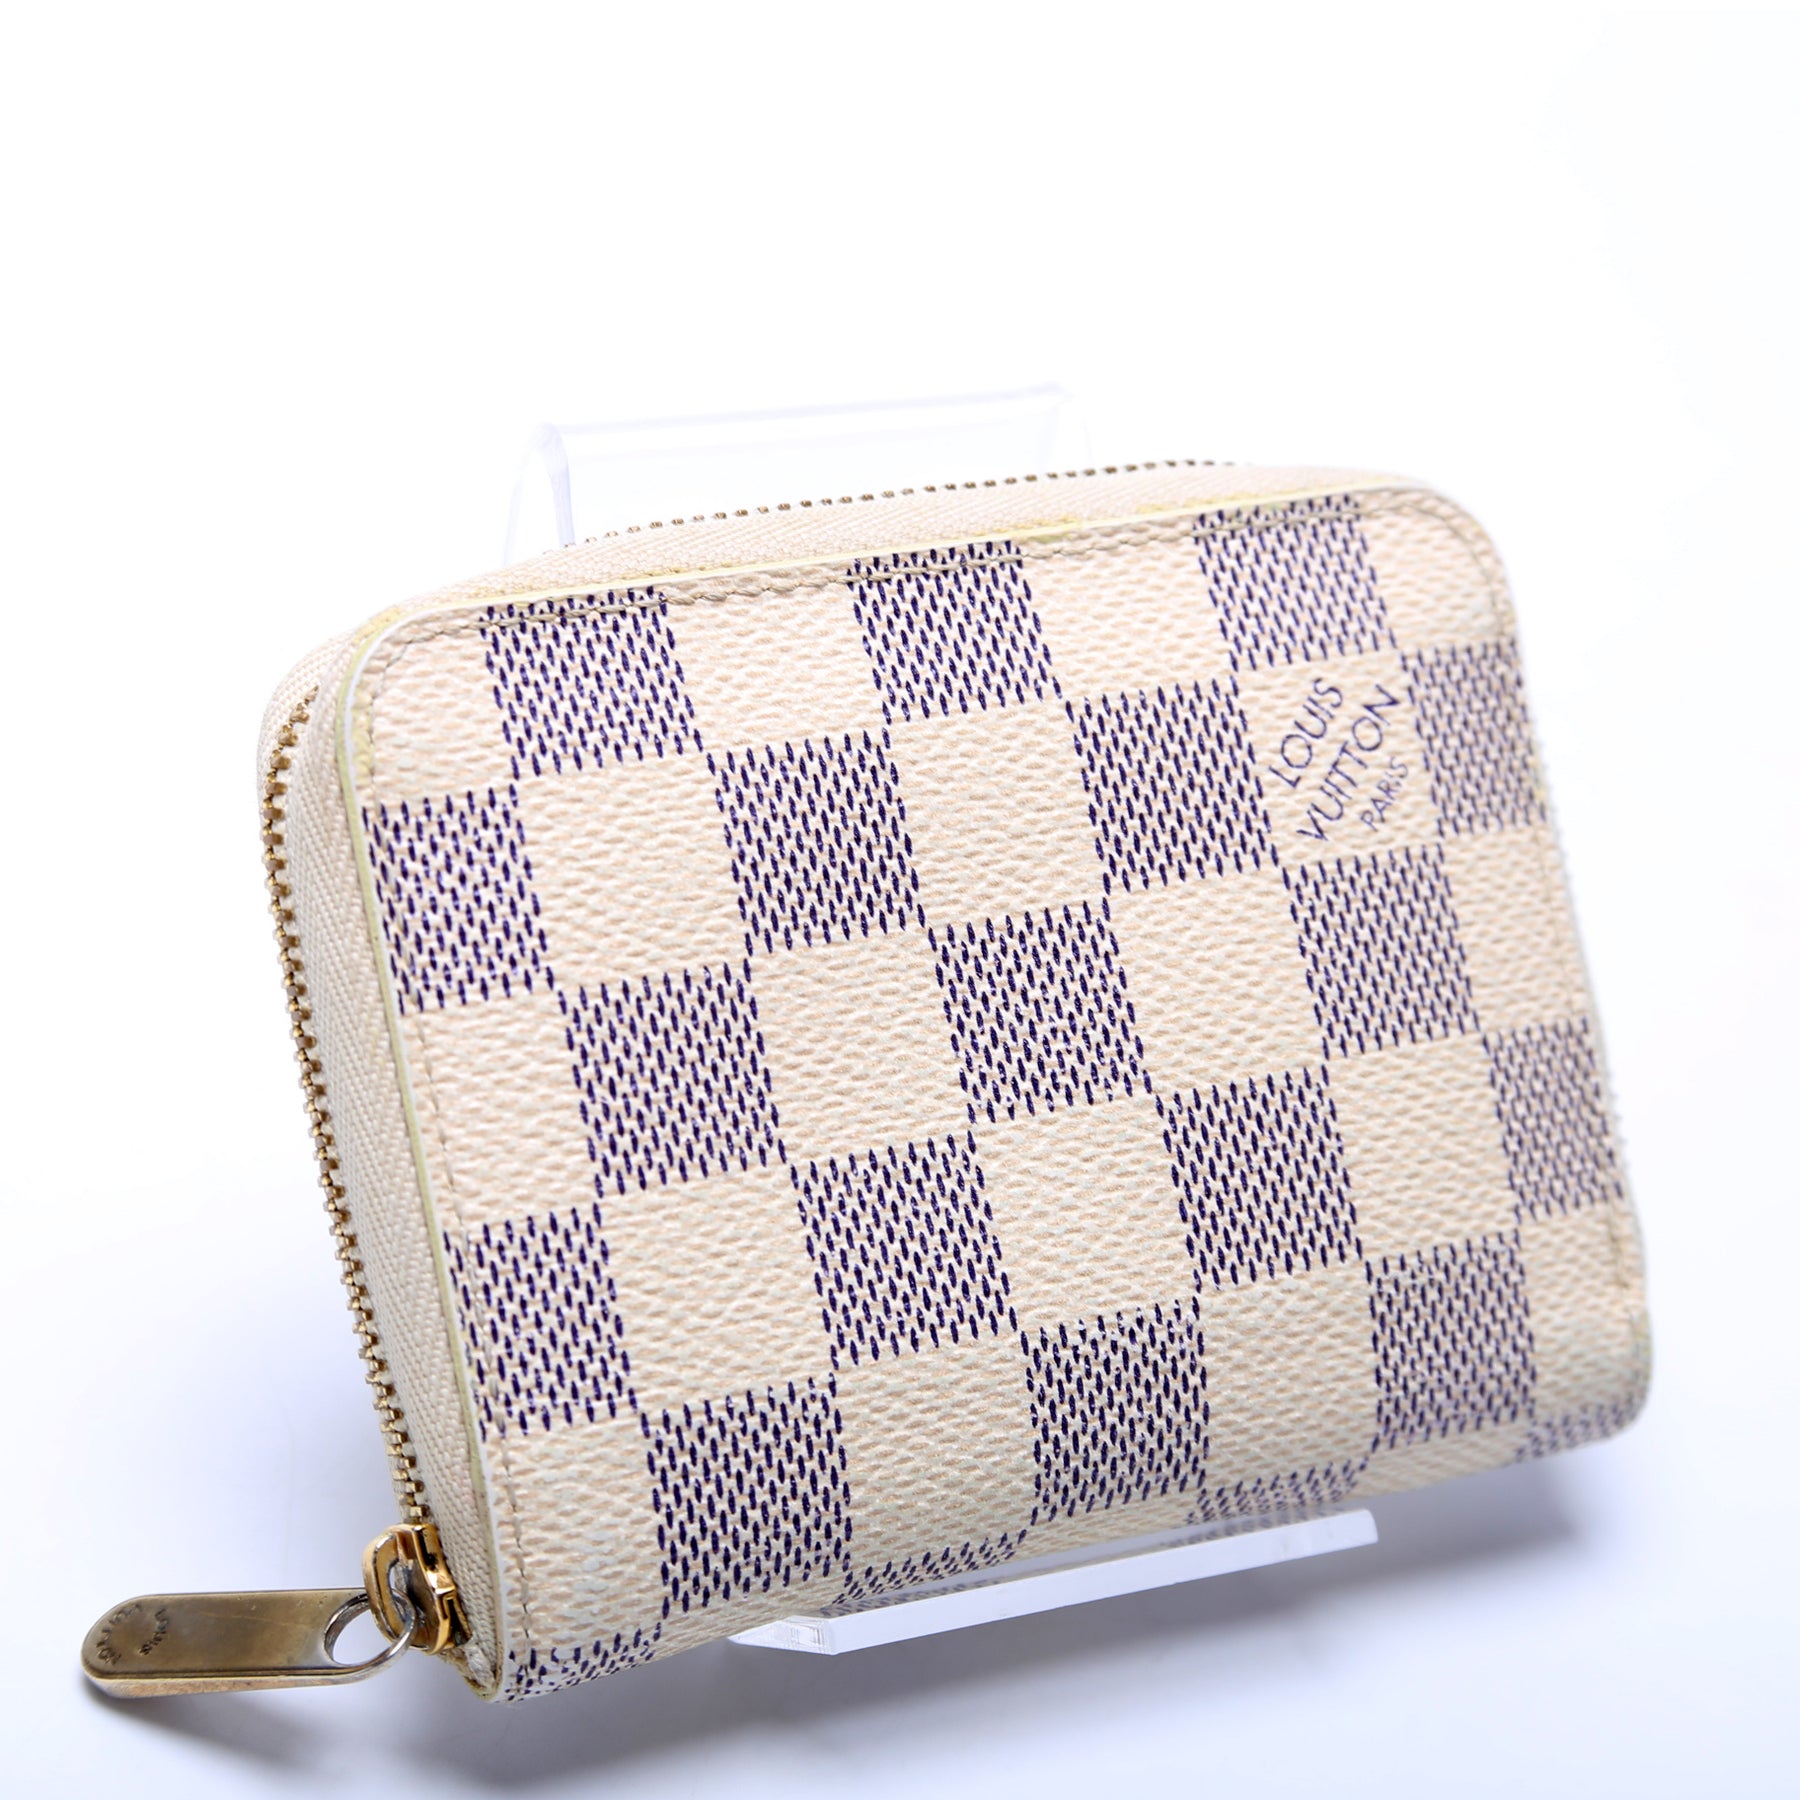 Products by Louis Vuitton: Zippy Coin Purse  Louis vuitton wallet zippy,  Coin purse, Purses